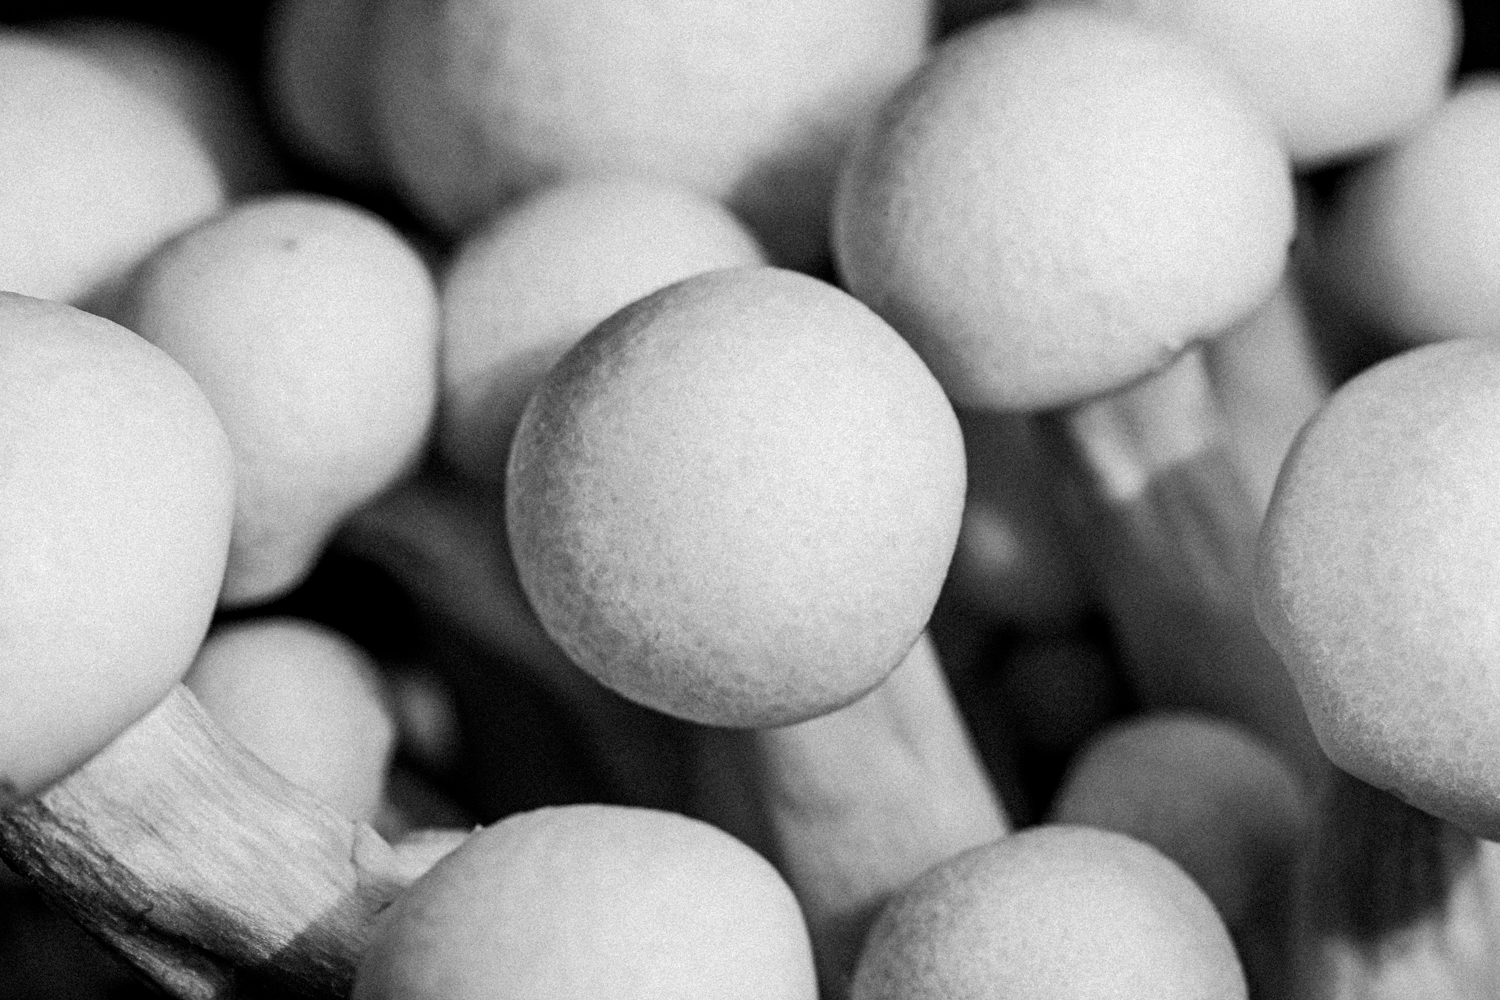 Abstract food still life cluster of mushrooms in black and white